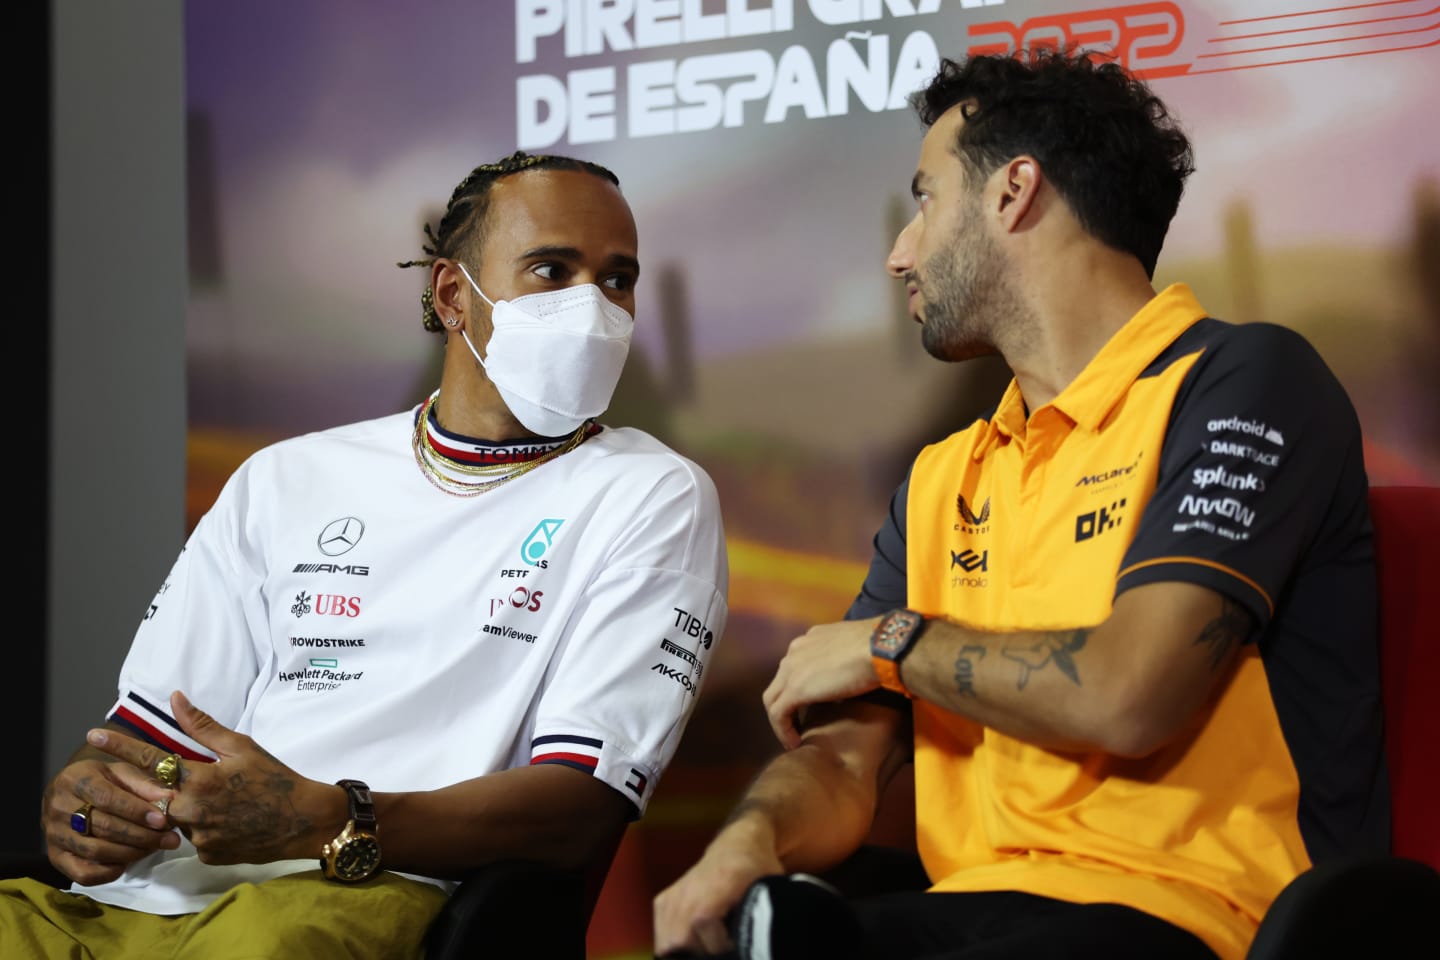 BARCELONA, SPAIN - MAY 20: Lewis Hamilton of Great Britain and Mercedes and Daniel Ricciardo of Australia and McLaren talk in the Drivers Press Conference prior to practice ahead of the F1 Grand Prix of Spain at Circuit de Barcelona-Catalunya on May 20, 2022 in Barcelona, Spain. (Photo by Bryn Lennon/Getty Images)